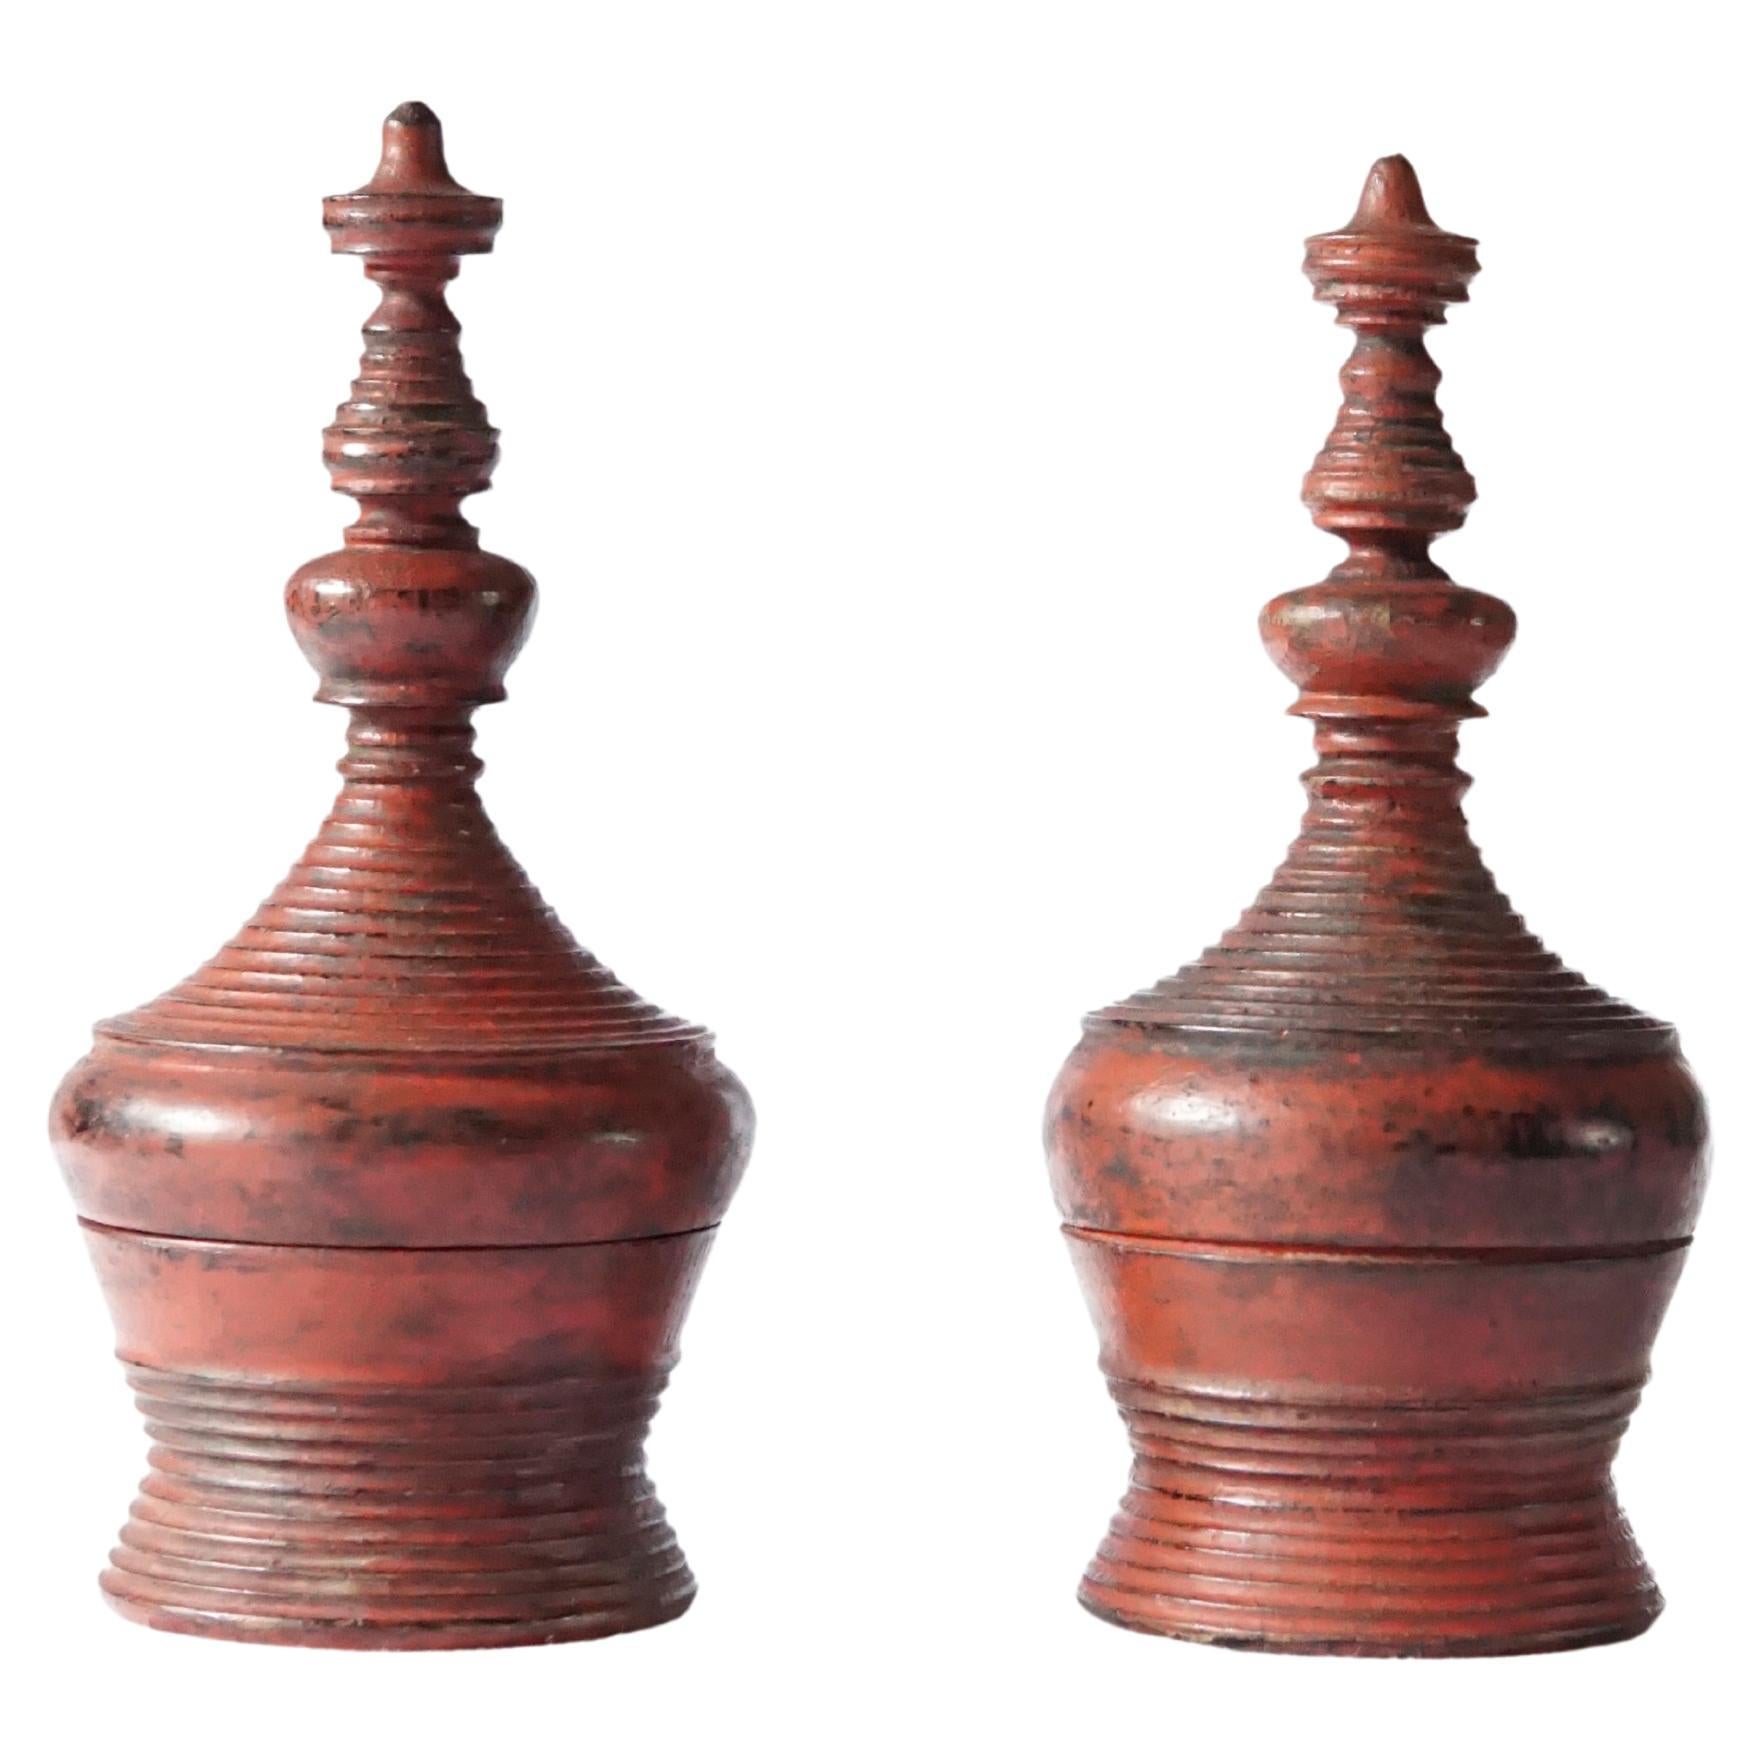 Pair of Small Burmese Red& Black Lacquer Offering Vessels, "Hsun Ok", c. 1900 For Sale